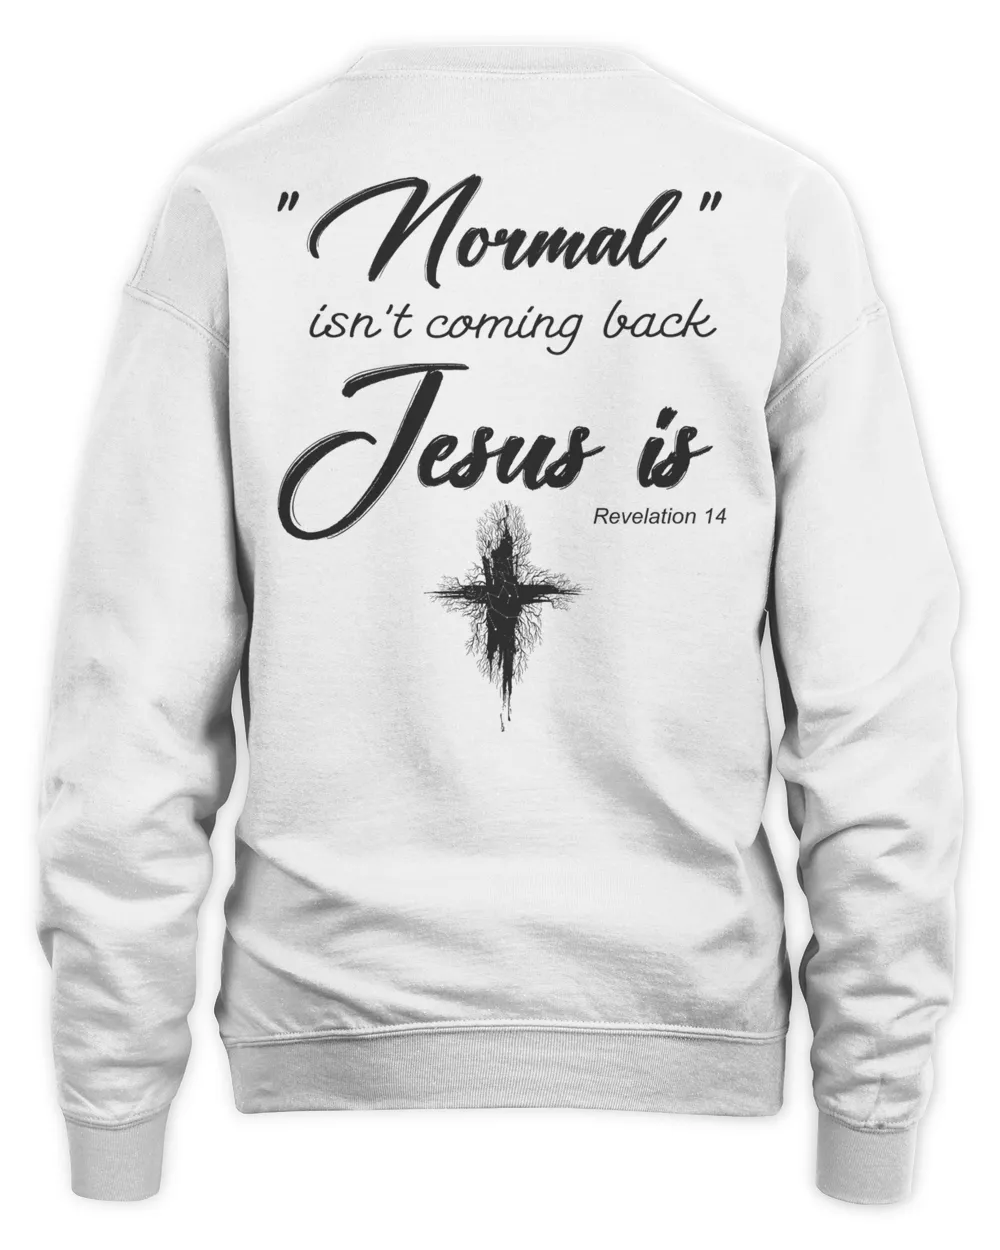 Normal Isn't Coming Back Jesus is Relevation 14 Double Sides